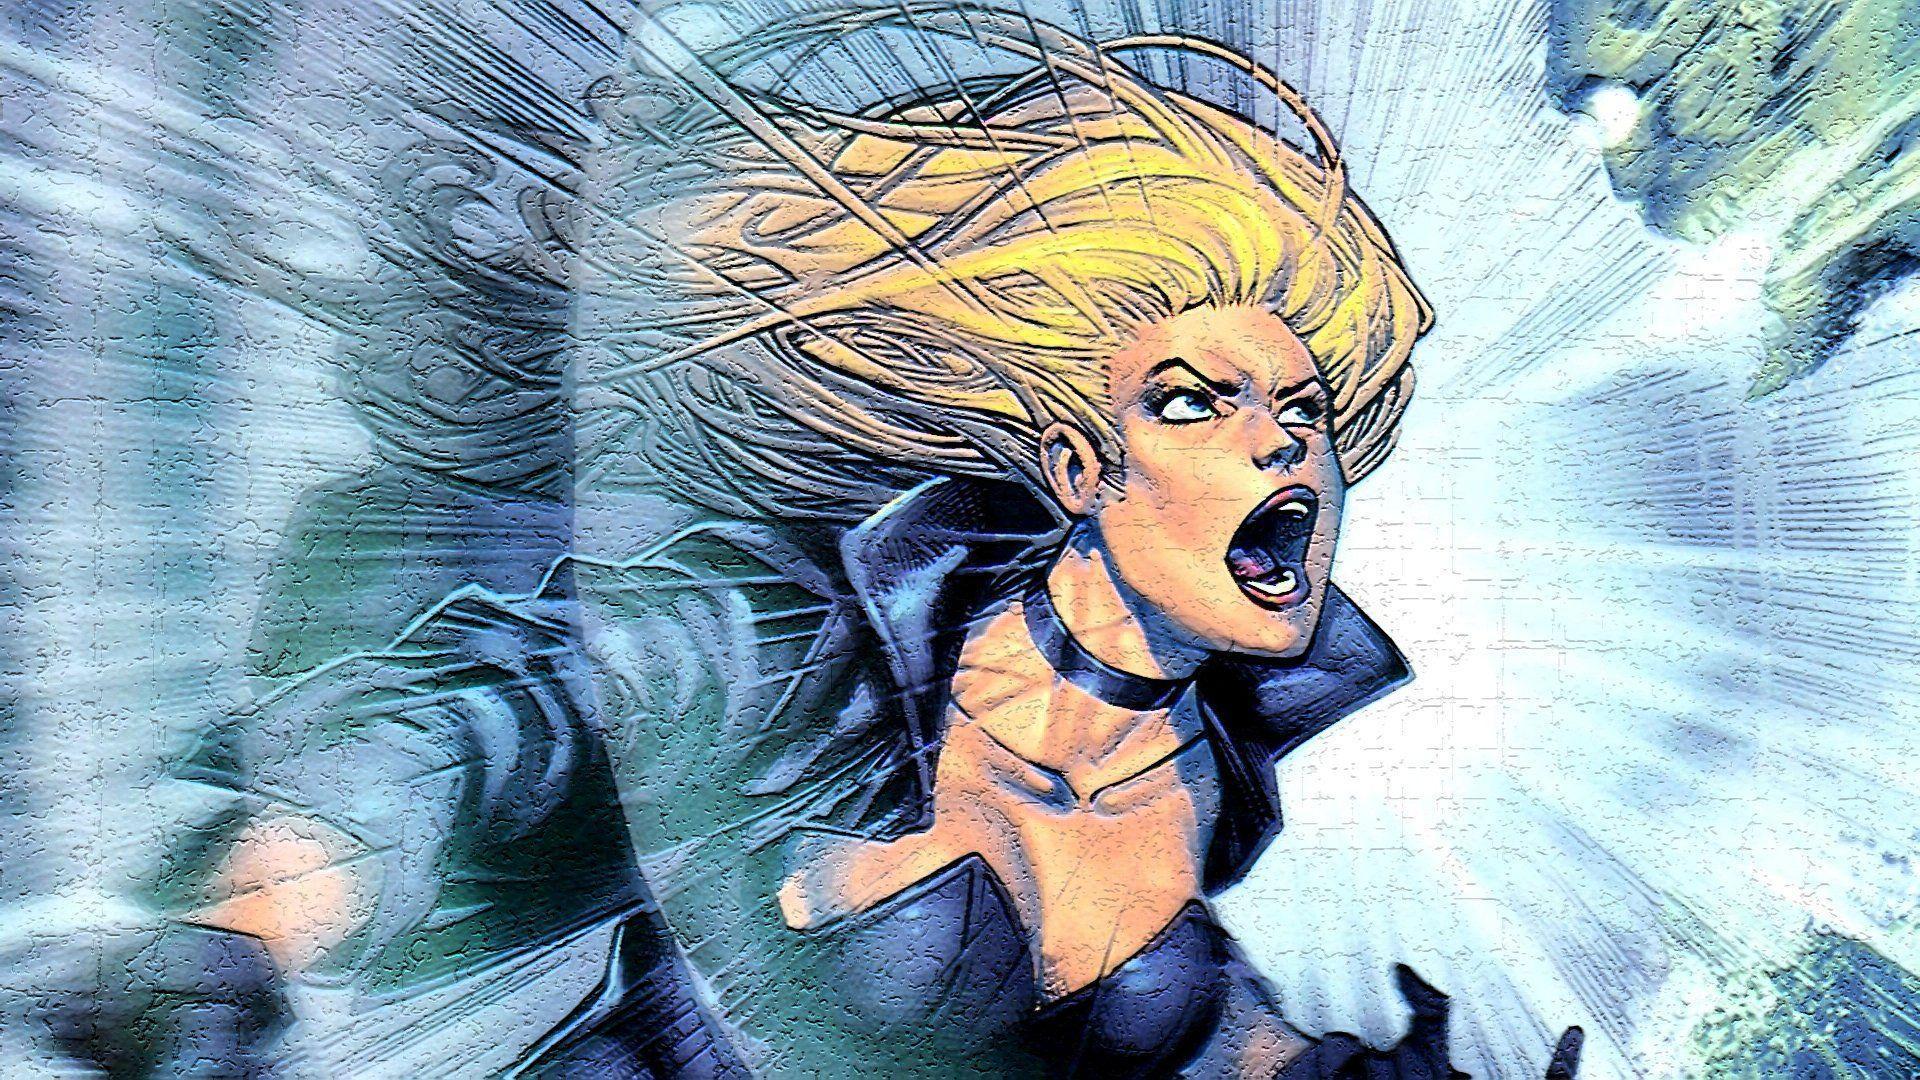 Black Canary Wallpapers Wallpaper Cave Canary is a superhero identity used by a number of denizens of star city but it also refers to other things. black canary wallpapers wallpaper cave